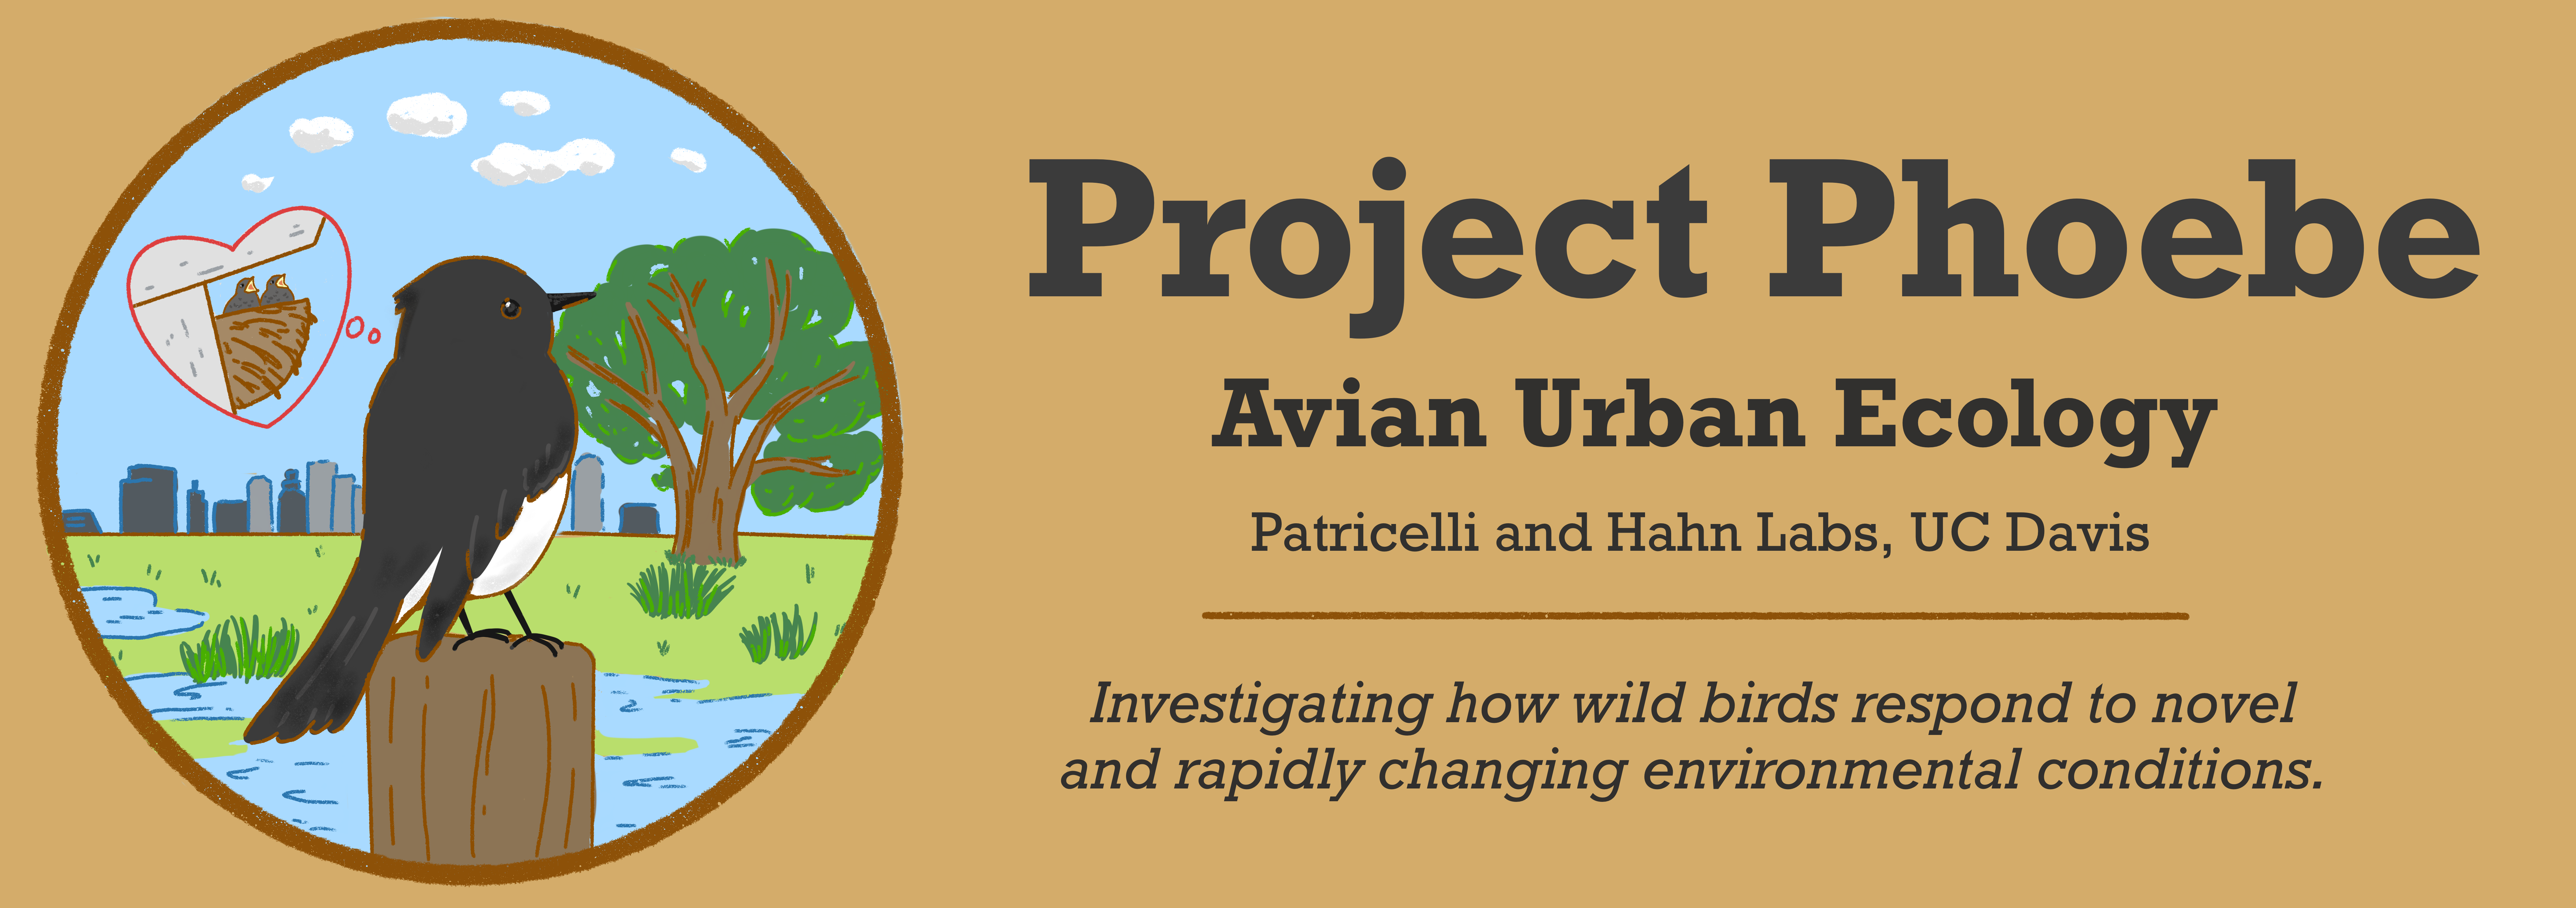 A banner titled "Project Phoebe" The text below the title reads "Avian Urban Ecology. Patricelli and Hahn Labs, UC Davis. Investigating how wild birds respond to novel and rapidly changing environmental conditions." On the left side, there is a circular logo depicting a Black Phoebe perched on a post in the foreground, with a thought bubble showing a nest full of baby chicks. In the background is a river, an oak tree, and a city skyline.